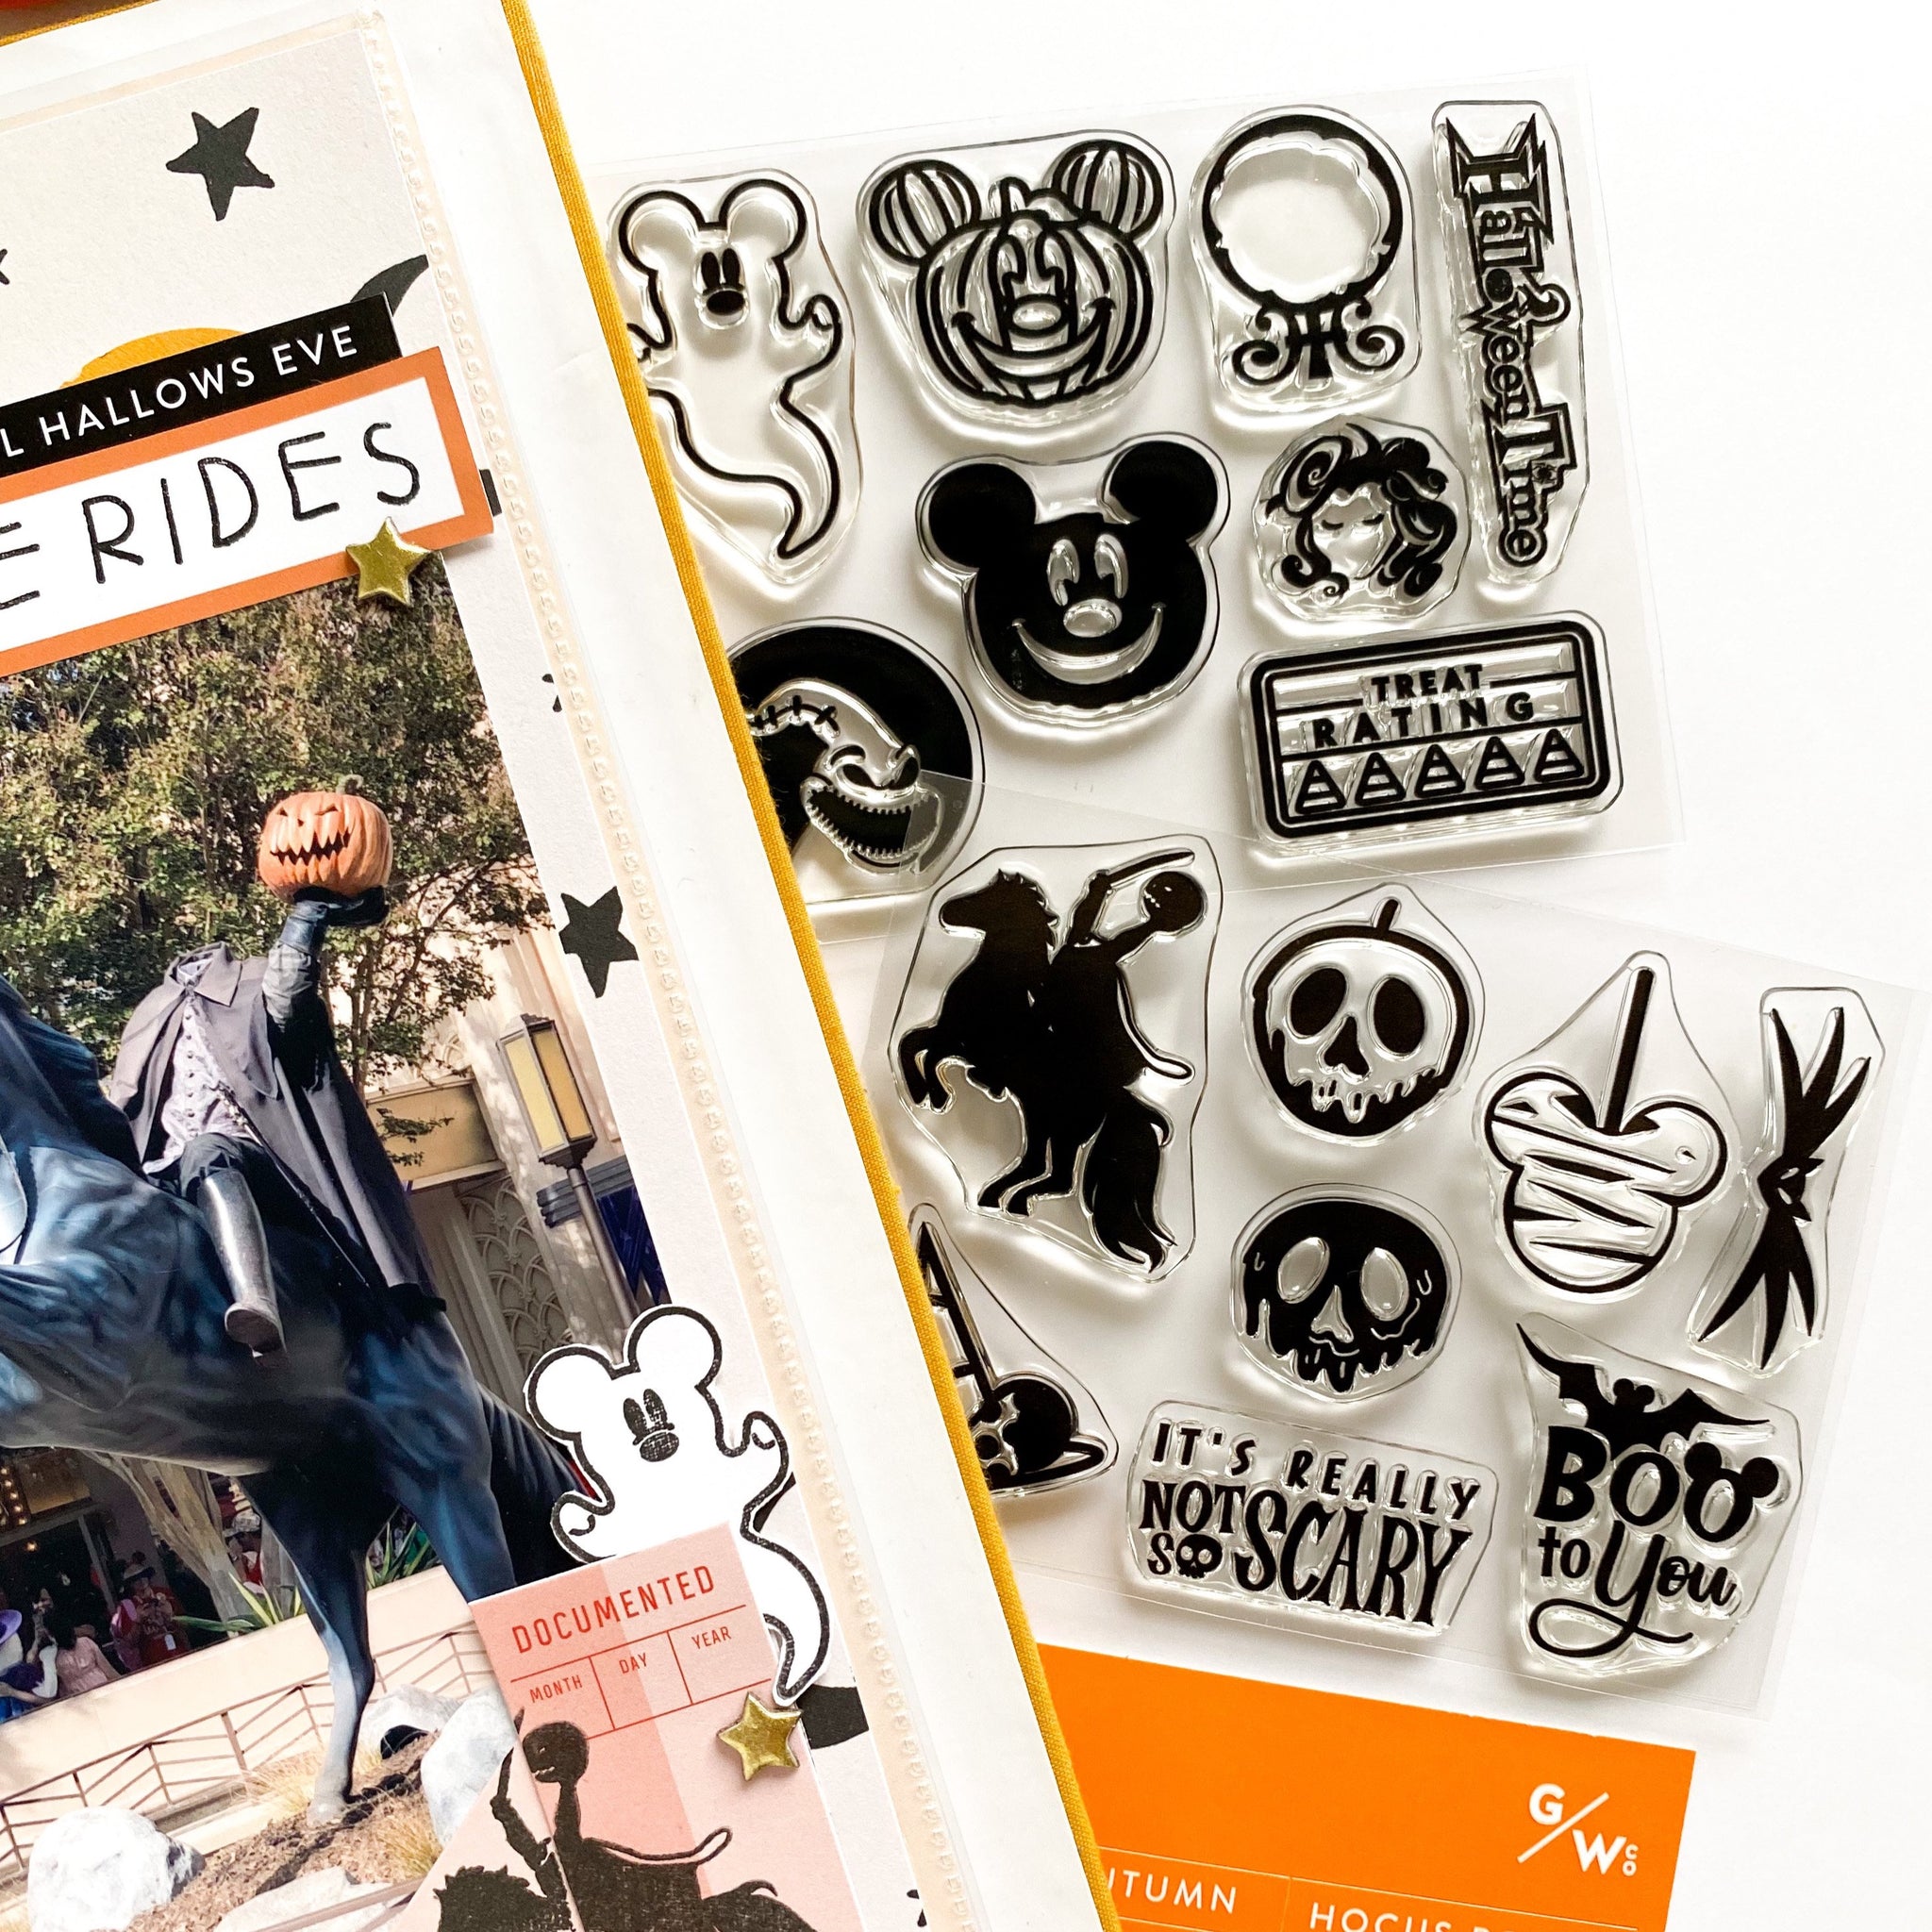 Halloweentime at Disney parks, includes headless horseman, Boo To You saying, It's really not so scary, Minnie witch hat, poison apple, Jack Skellington bowtie, Halloween DIY craft set for stamping, scrapbooks, memory keeping, memory planning, travelers notebooks and more. 